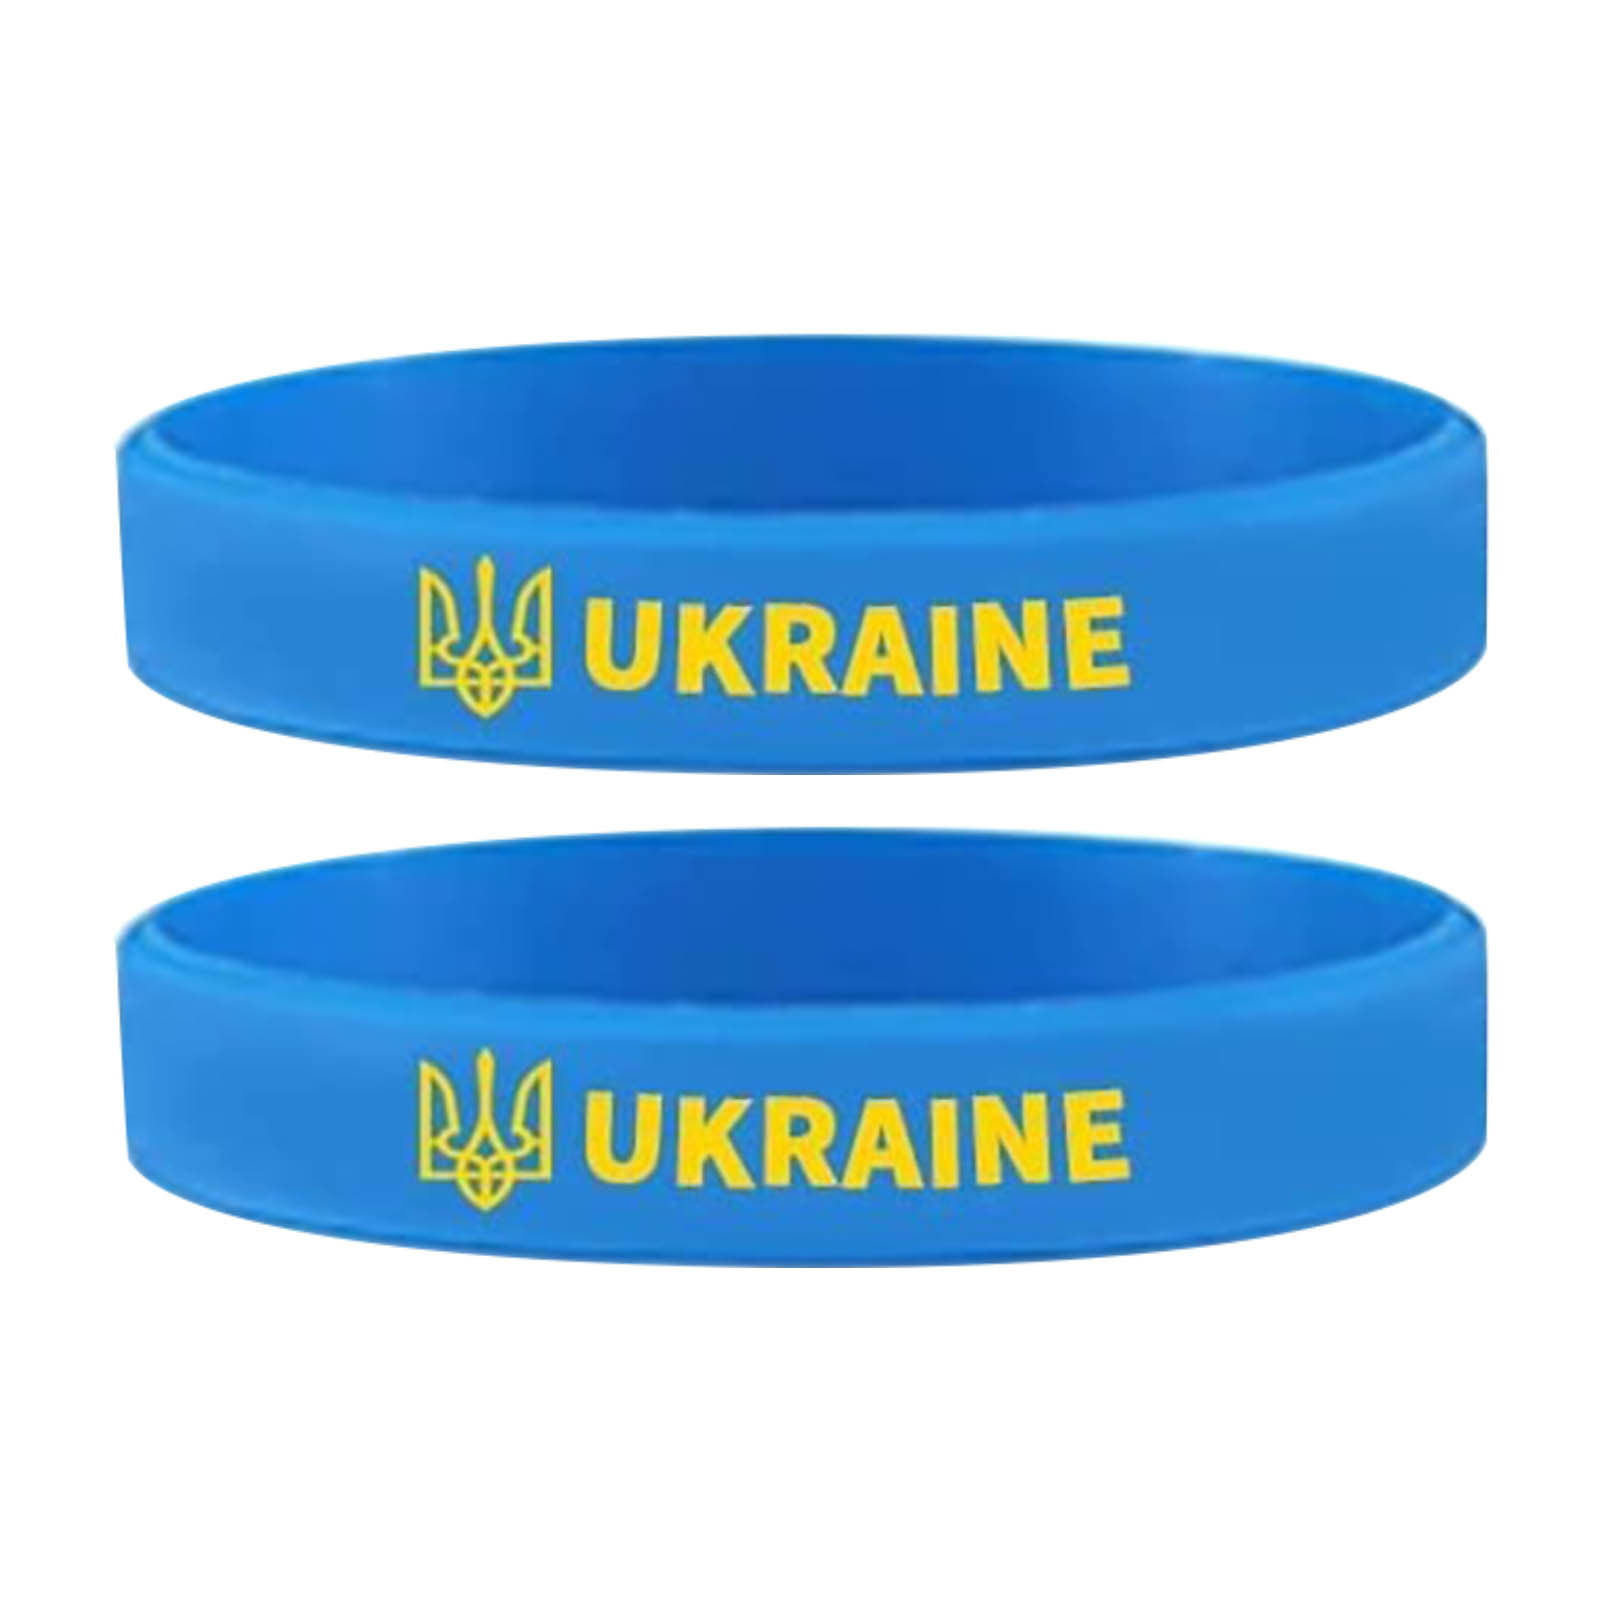 Silicone Bracelet,Country Flag Silicone Bracelet Wristbands Soccer fan Accessories Countries Flags Wristband Souvenir Sport Bracelets Football Silicone Bracelet Cheerleading Supplies